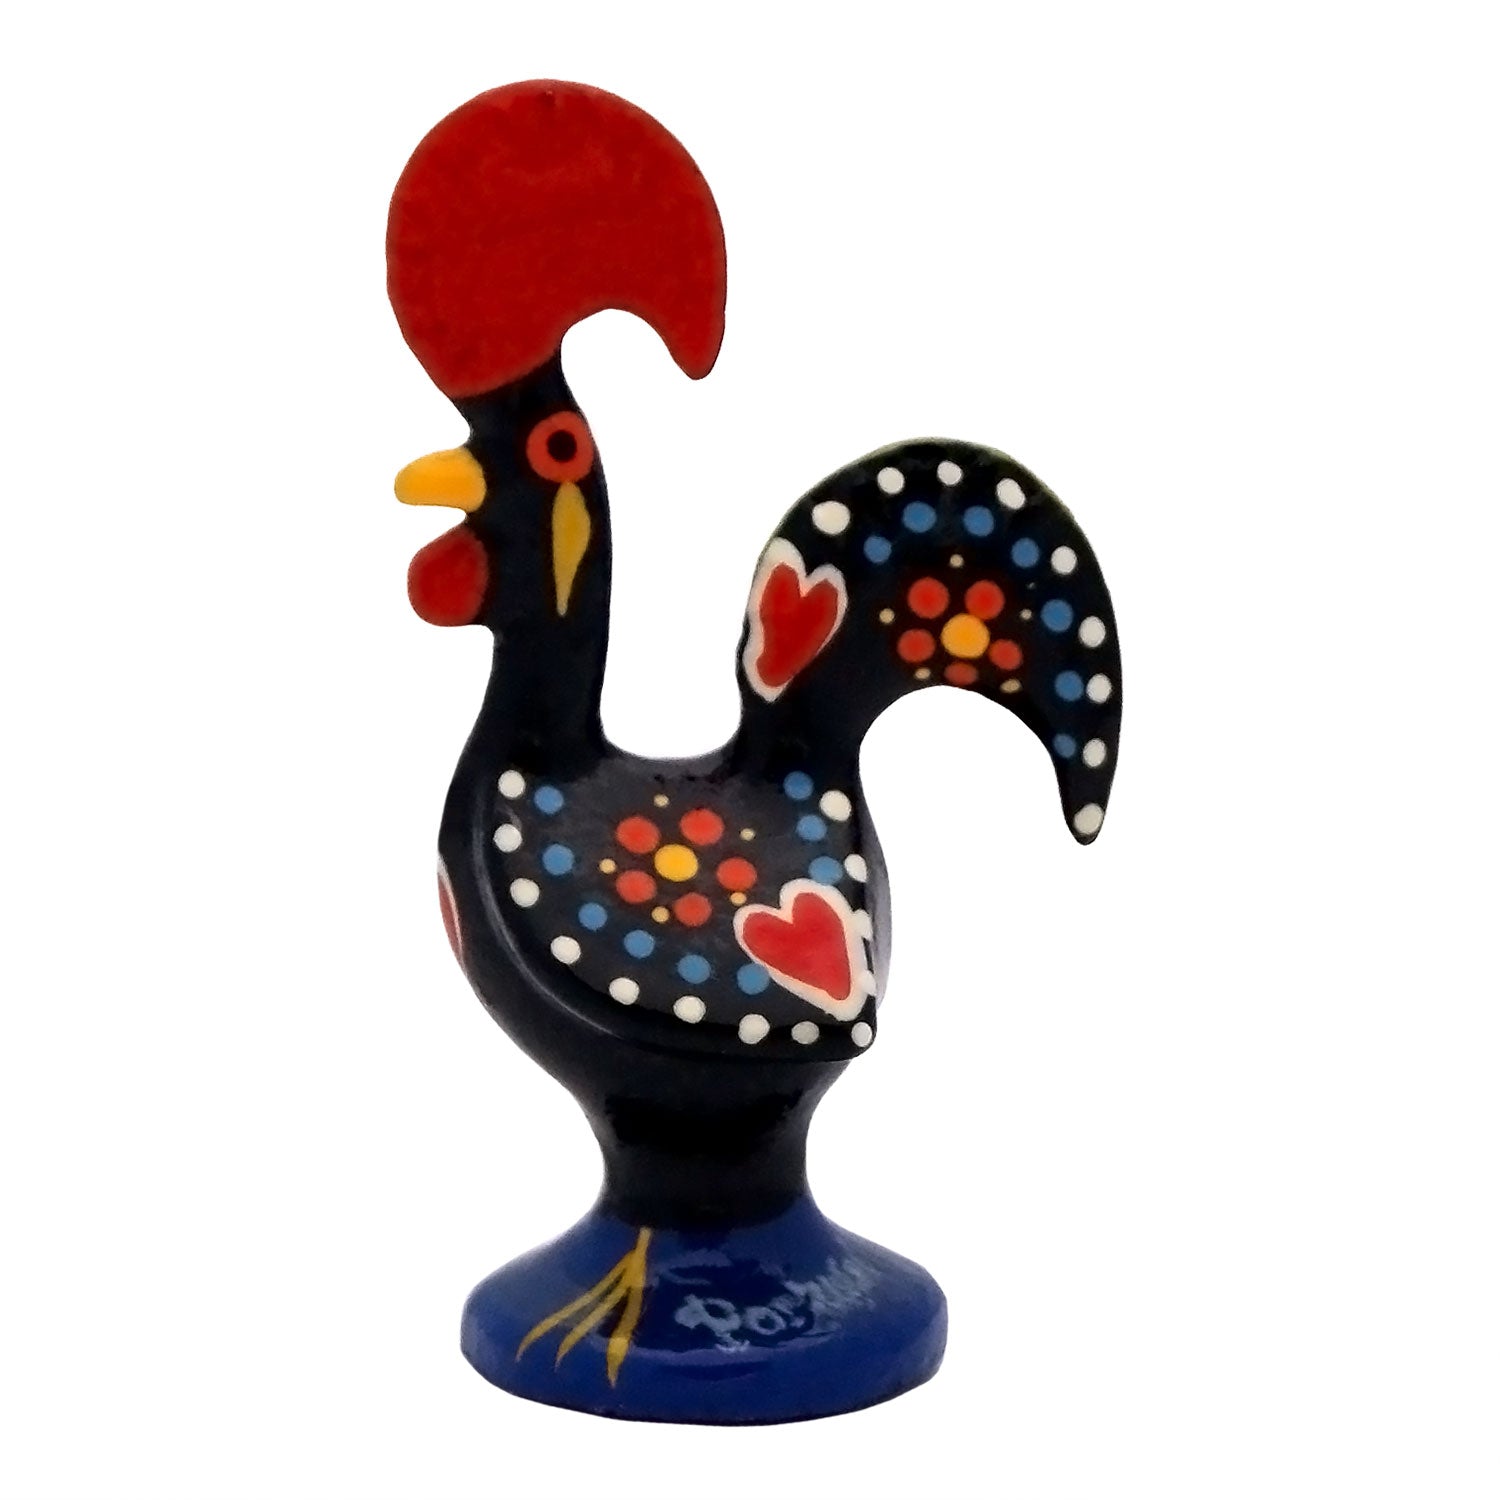 2.75 Inch Good Luck Portuguese Rooster Barcelos Metallic Figurine - Set of 3